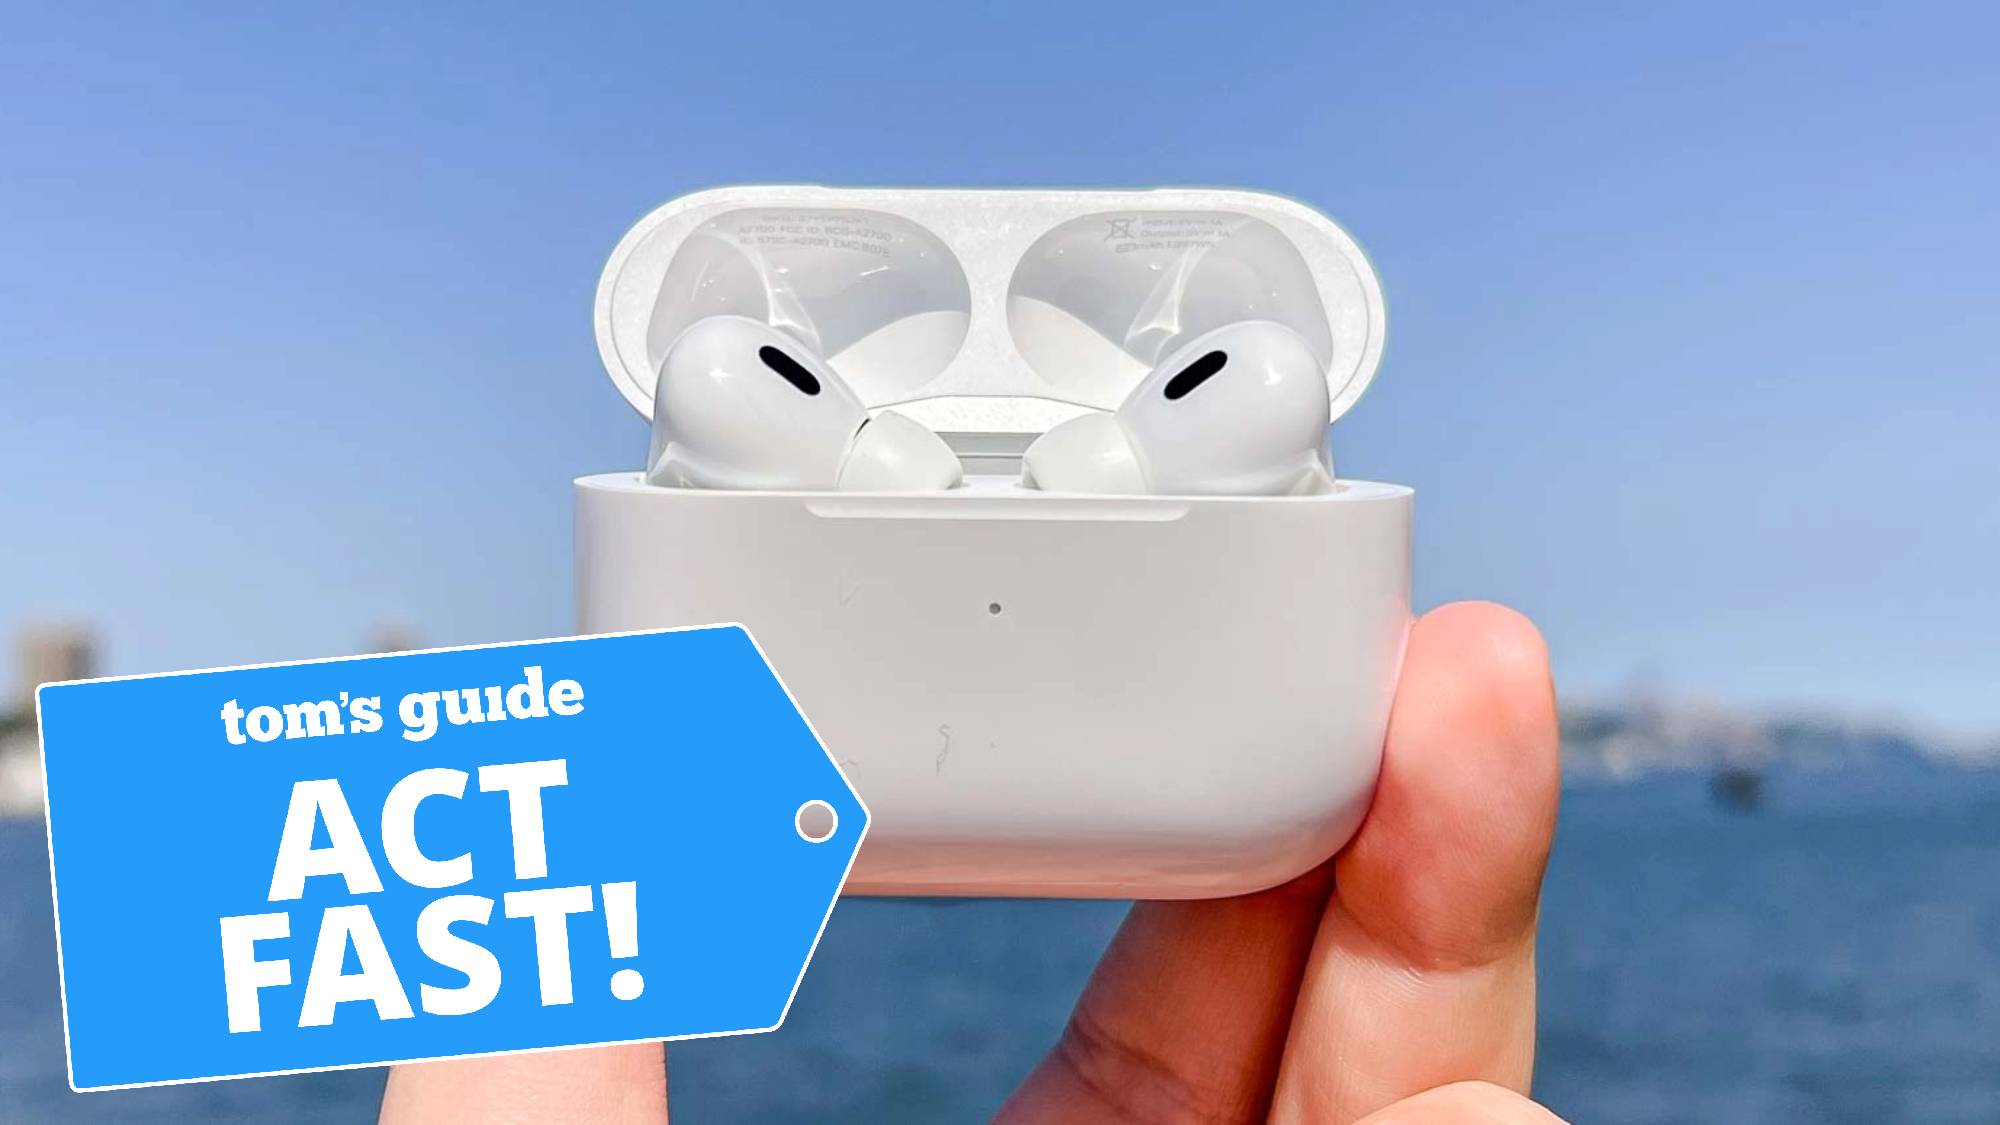 AirPods Pro 2 with a Tom's Guide deal tag